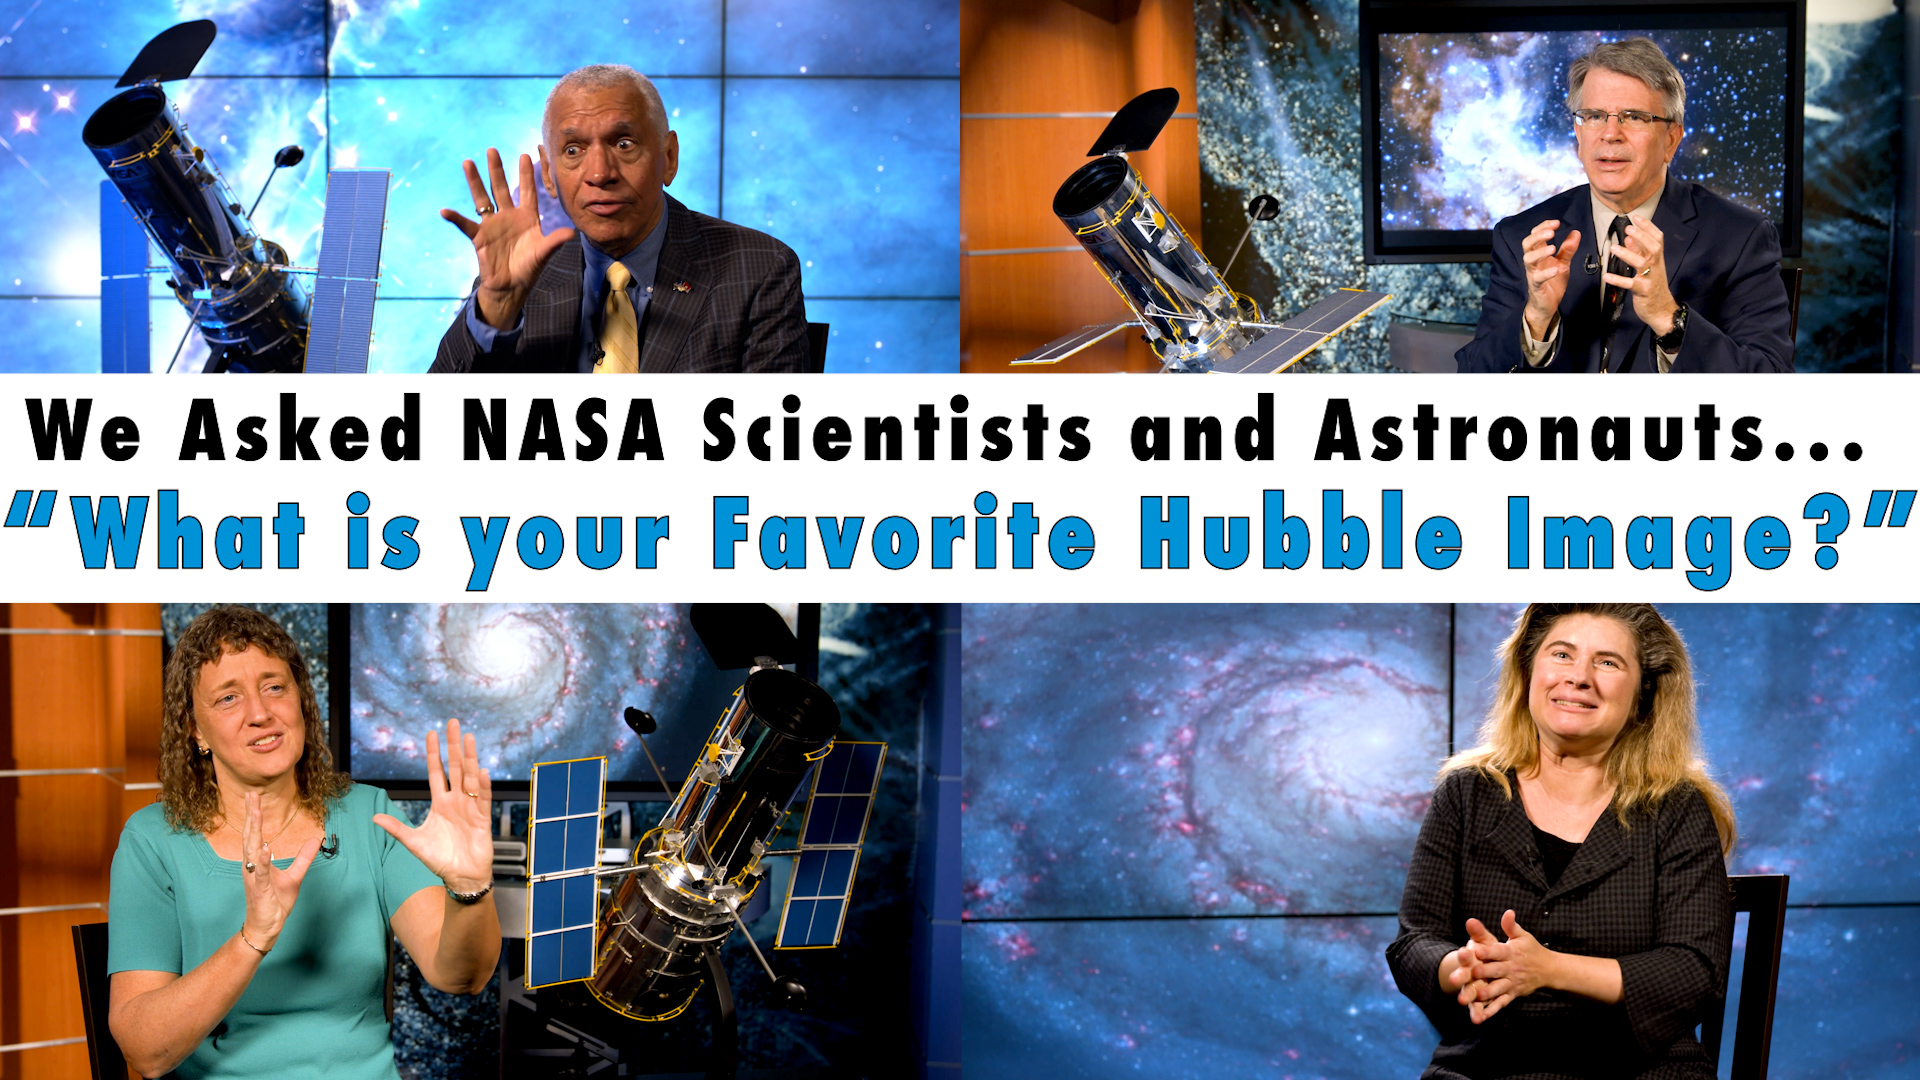 Preview Image for We Asked NASA Scientists and Astronauts "What is your Favorite Hubble Image?"